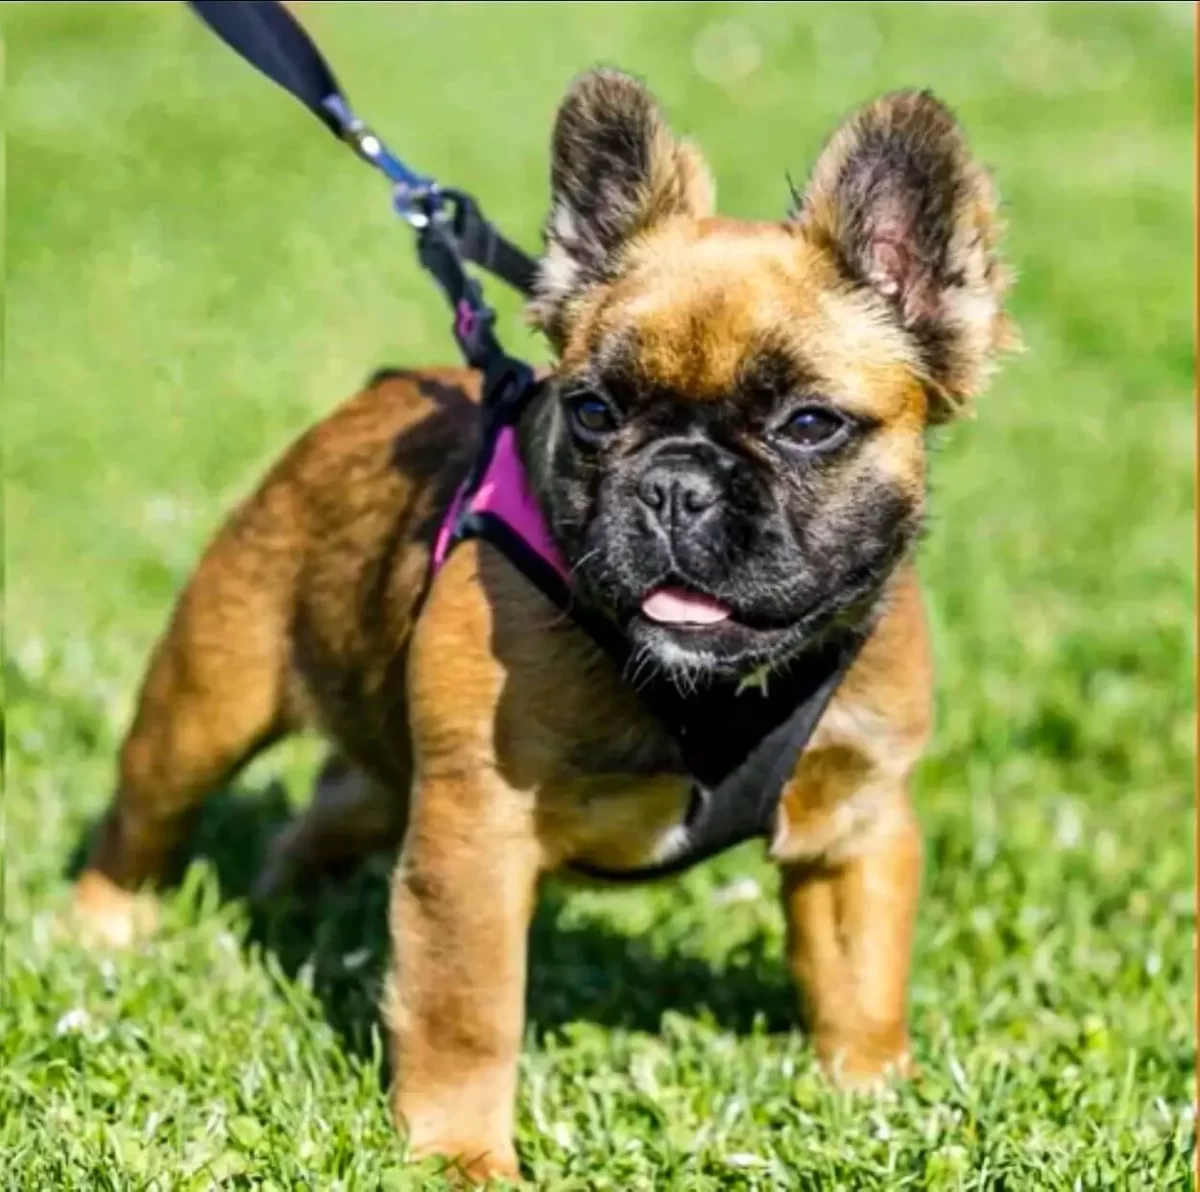 French bulldog yorkie mix in a harness on grass looking the other way